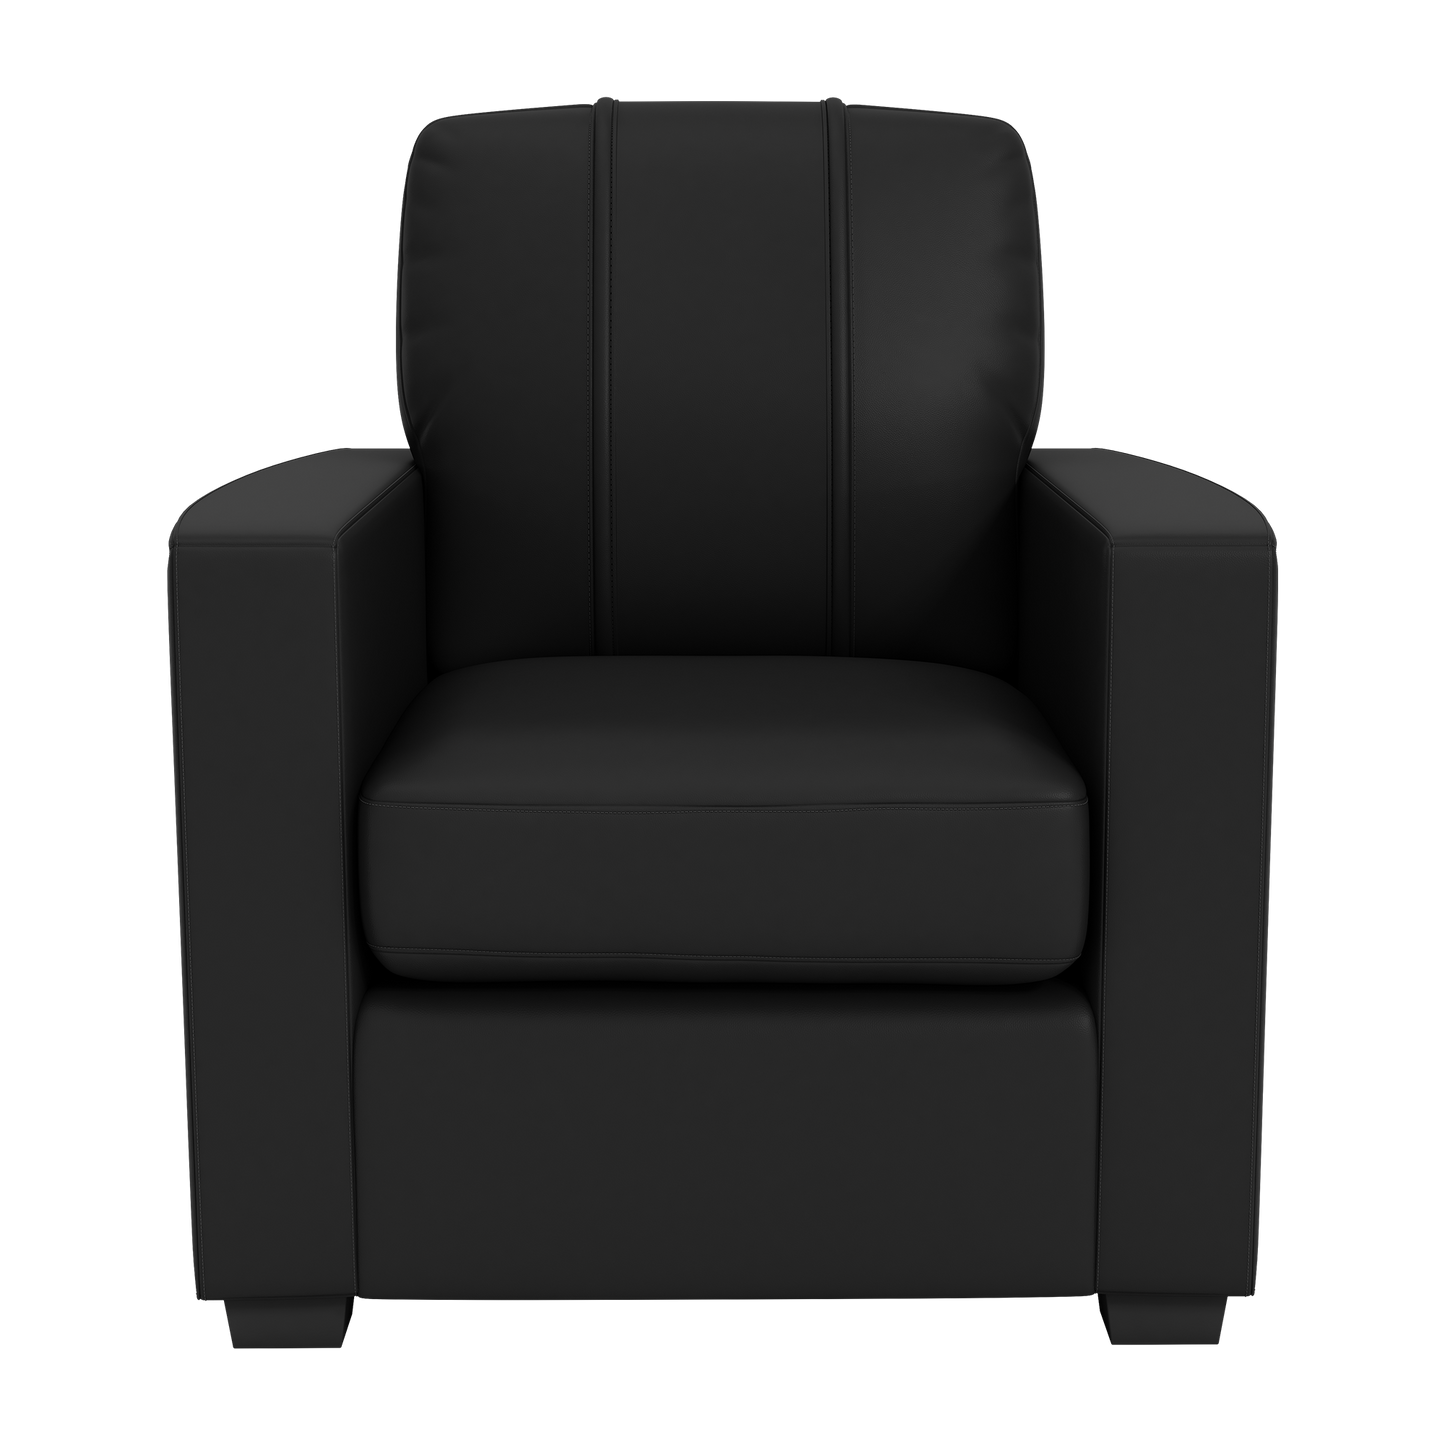 Silver Club Chair with Denver Nuggets 2023 Championship Logo